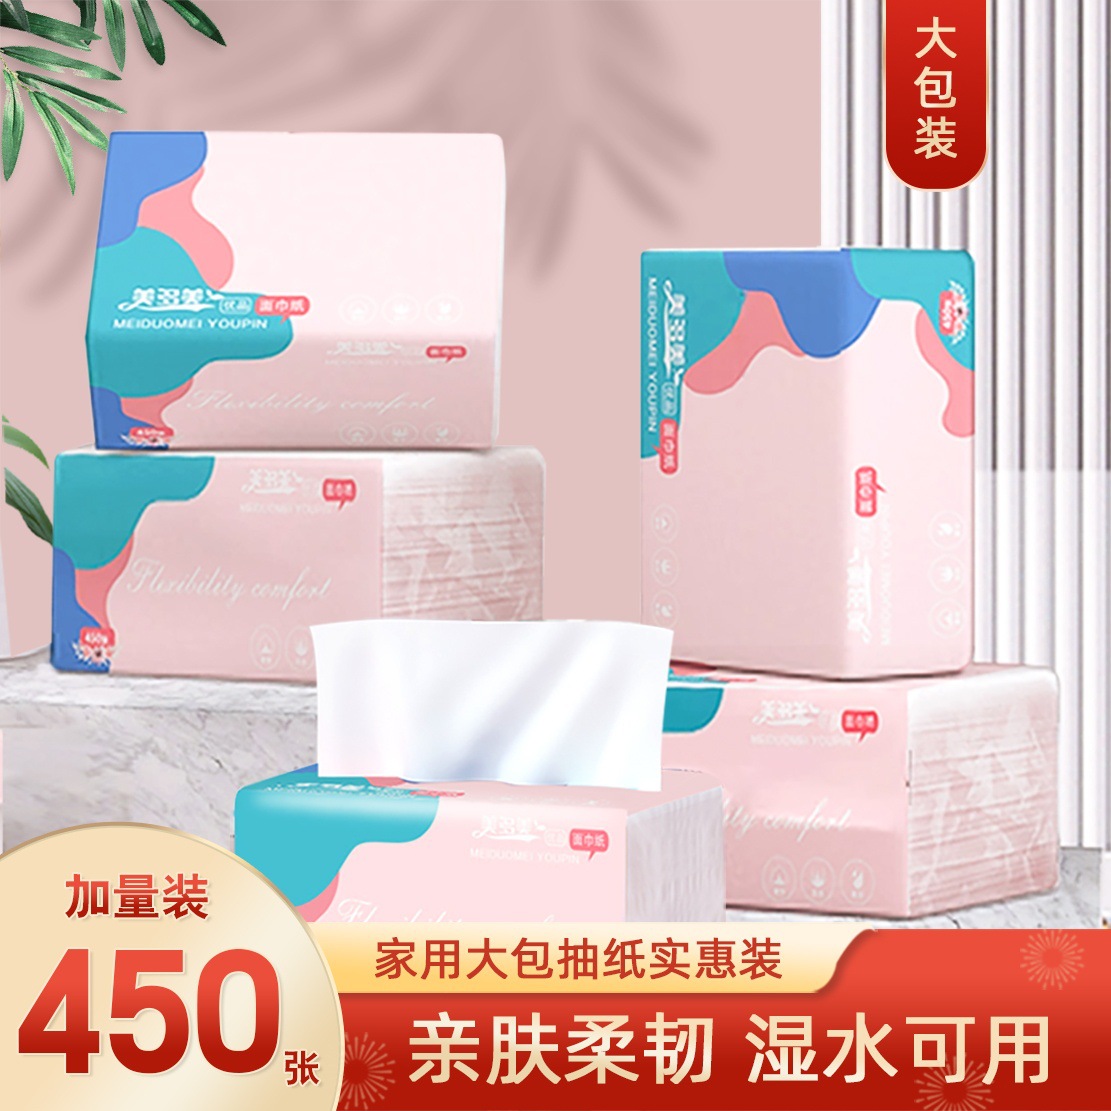 Factory Paper Extraction Wholesale Large Bags Household Paper Extraction Full Box Affordable Tissue Mother and Baby Available One Piece Dropshipping